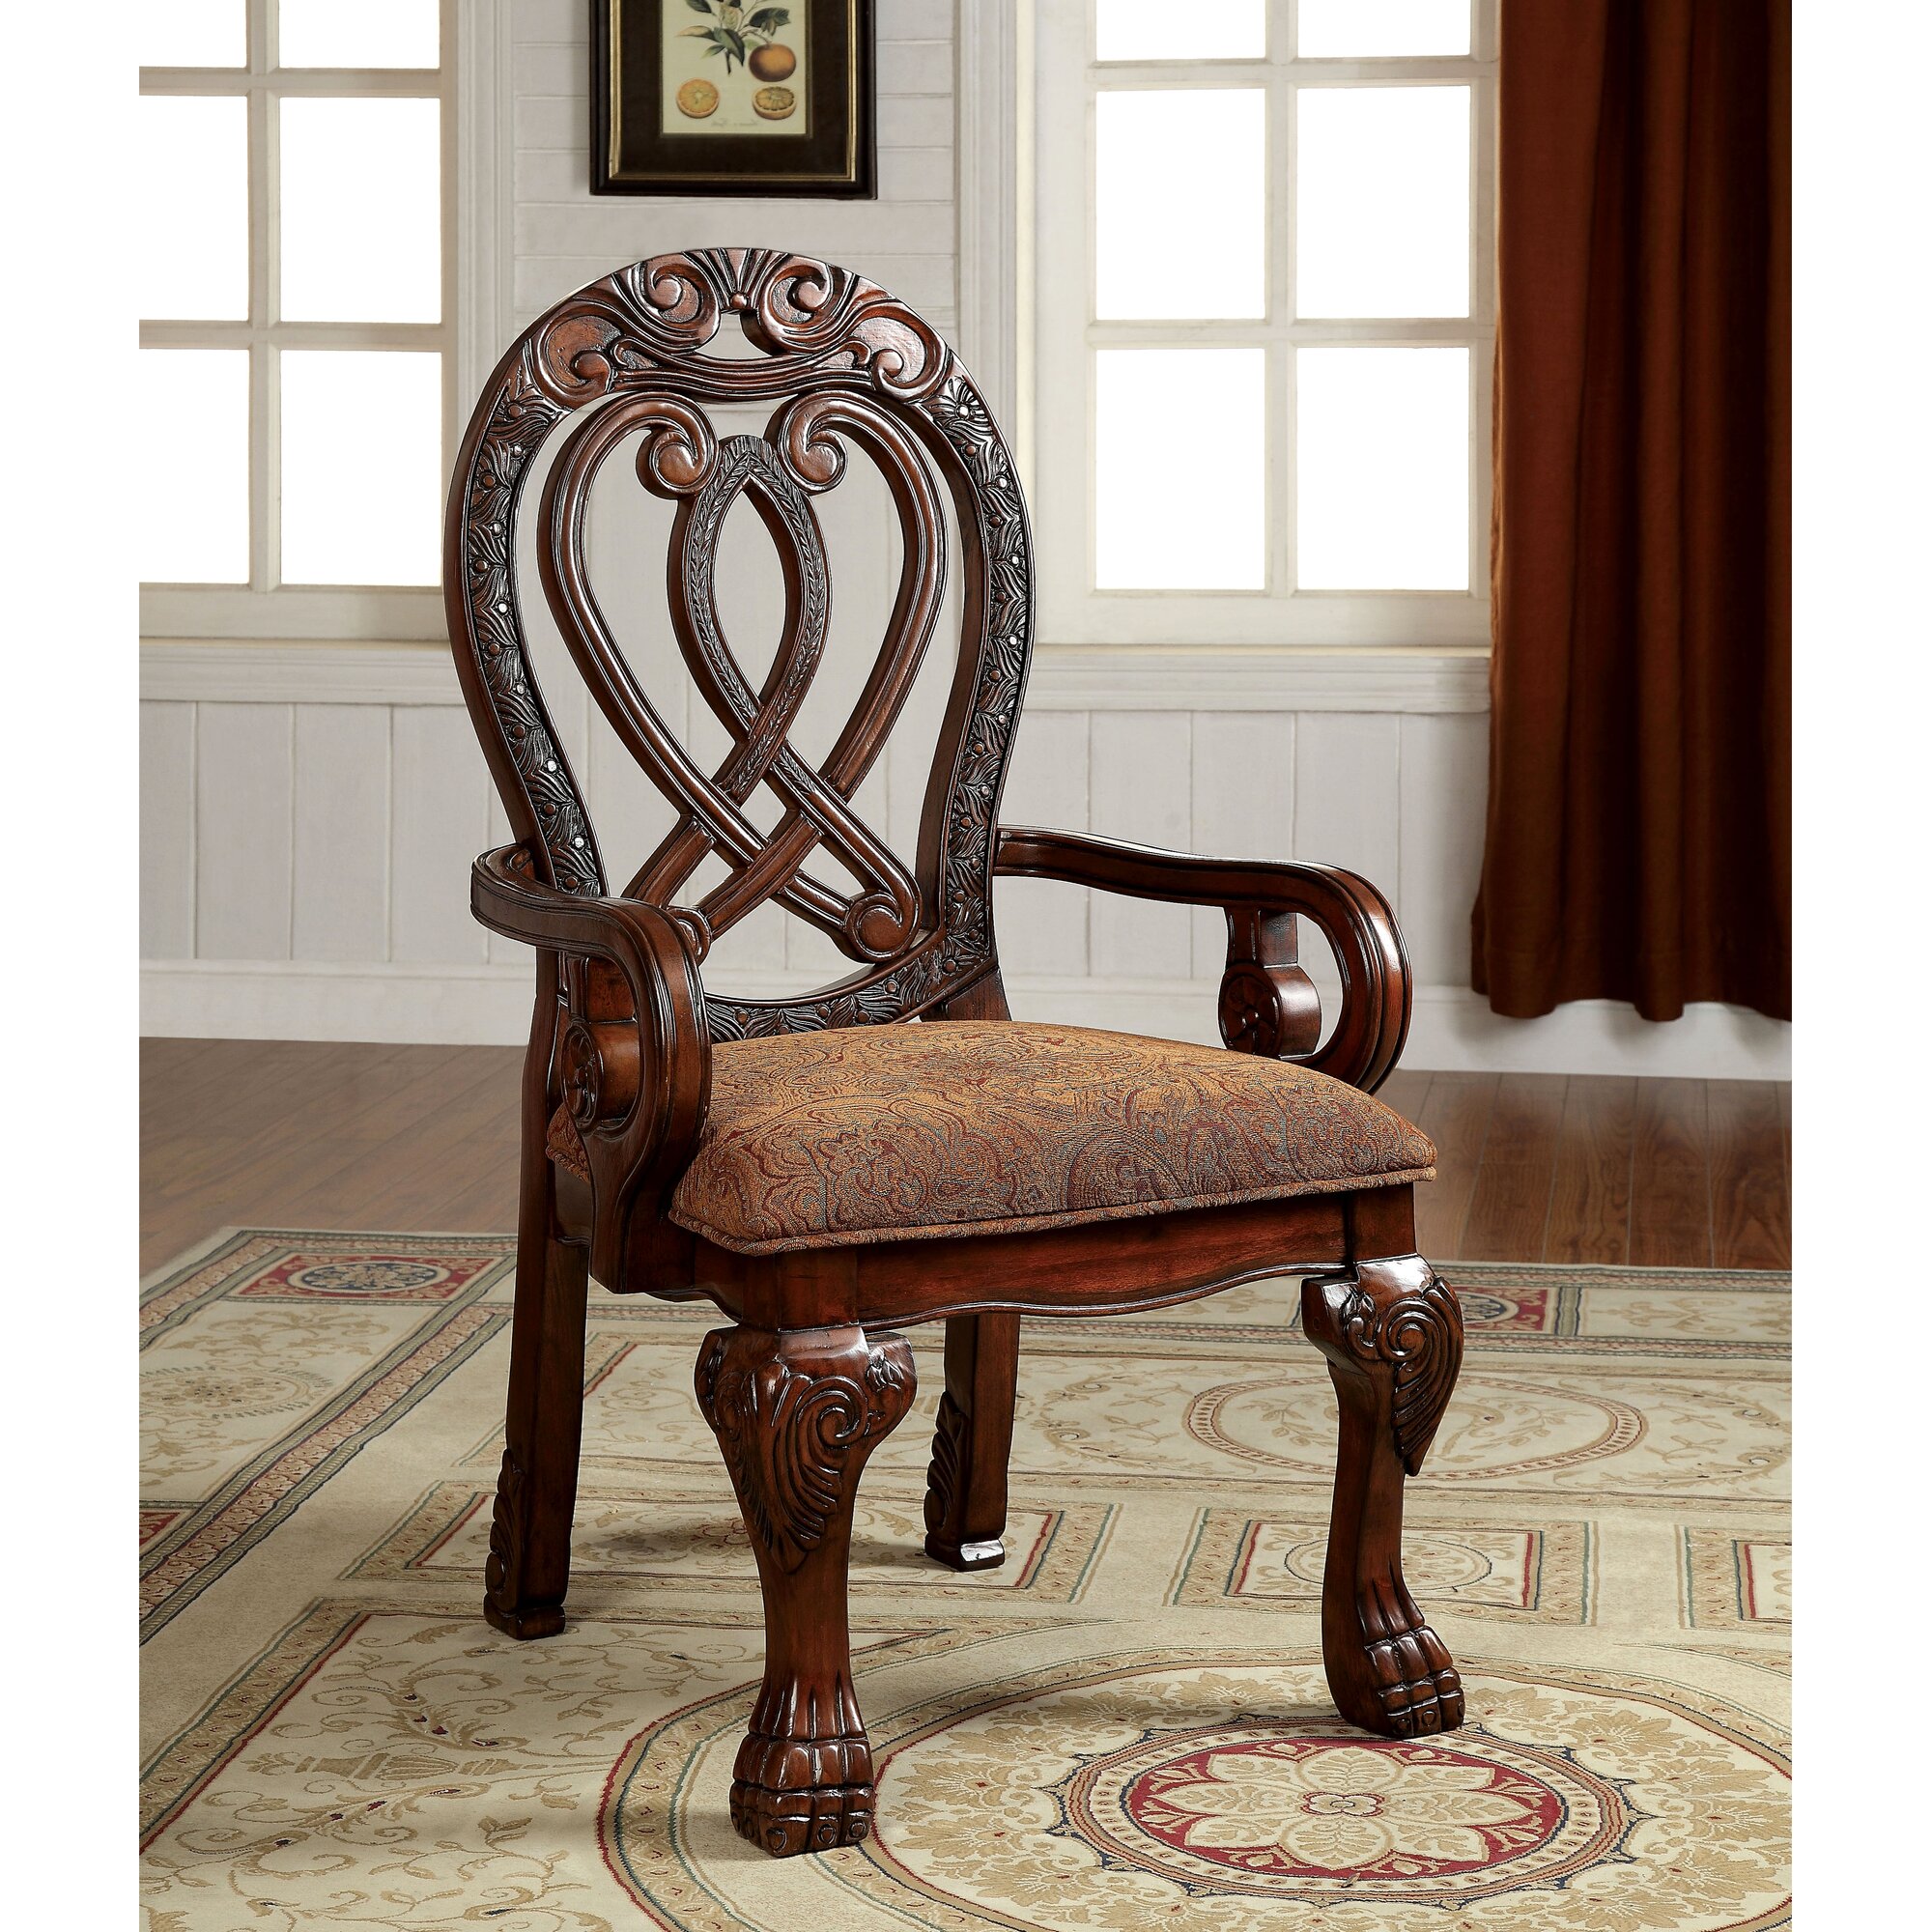 Formal dining chairs